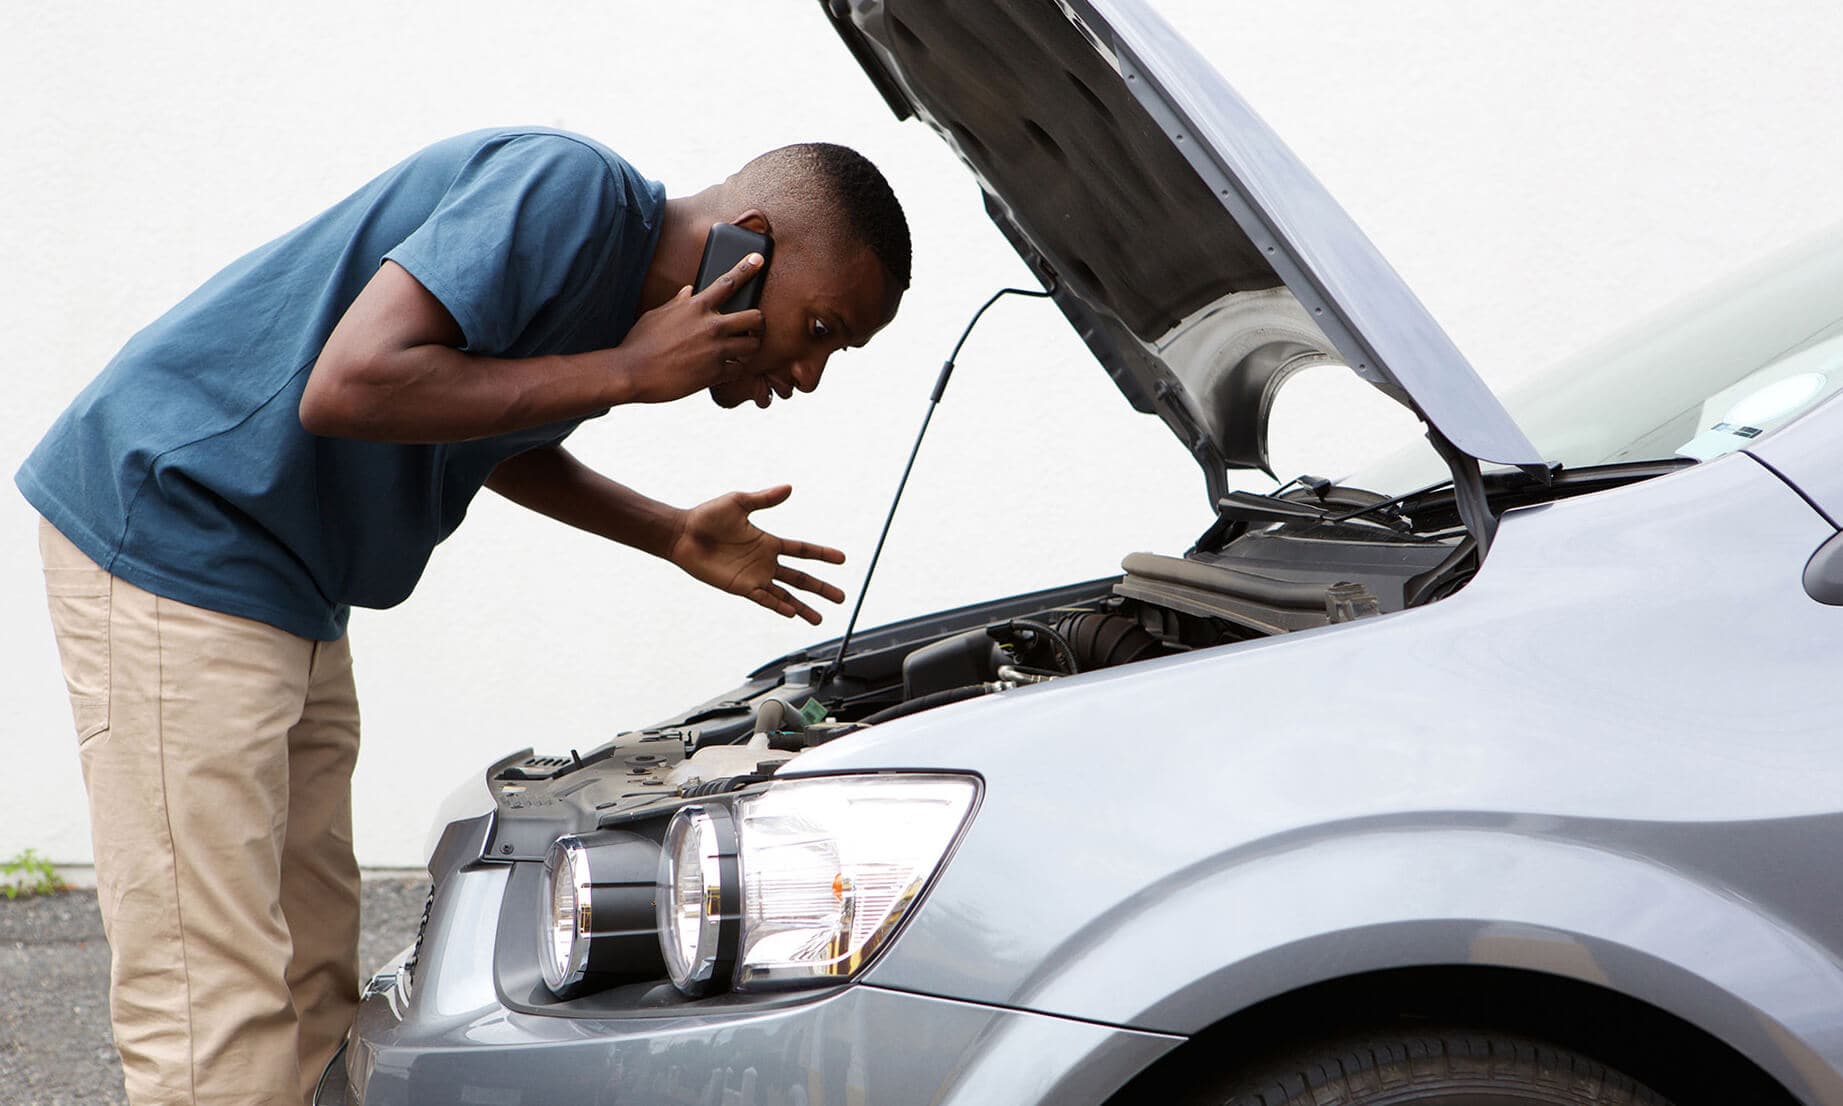 DIY vs. Professional Help: When to Call a Mobile Mechanic for Your Battery